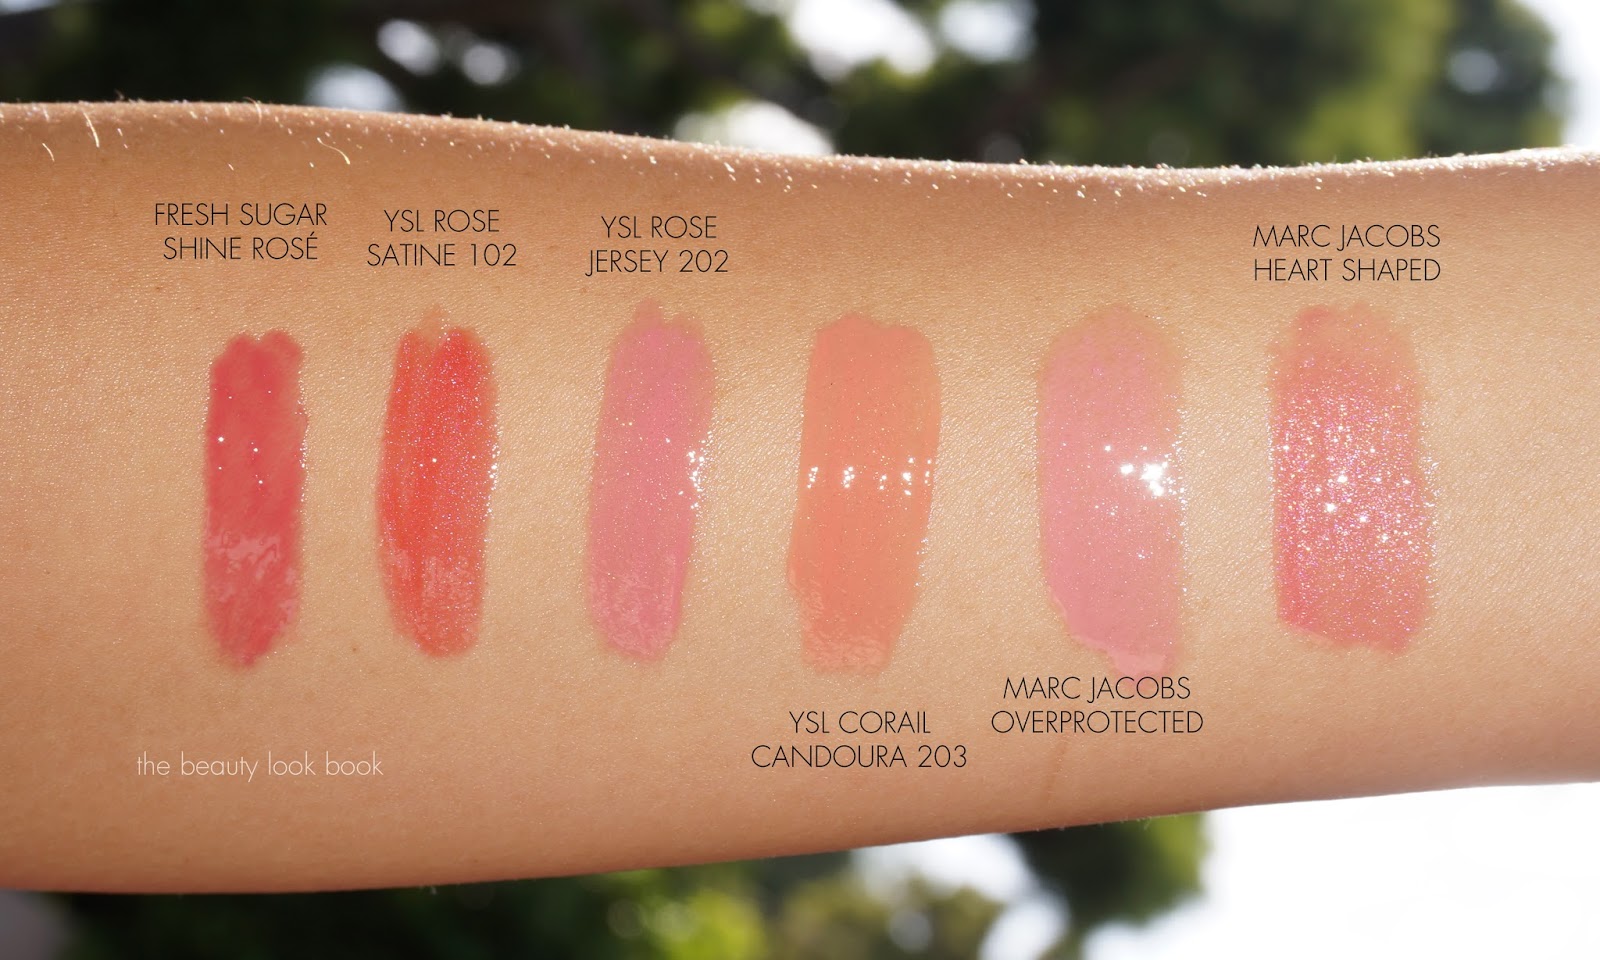 Yves Saint Laurent Gloss Volupté in 202 Rose Jersey Review & Swatches